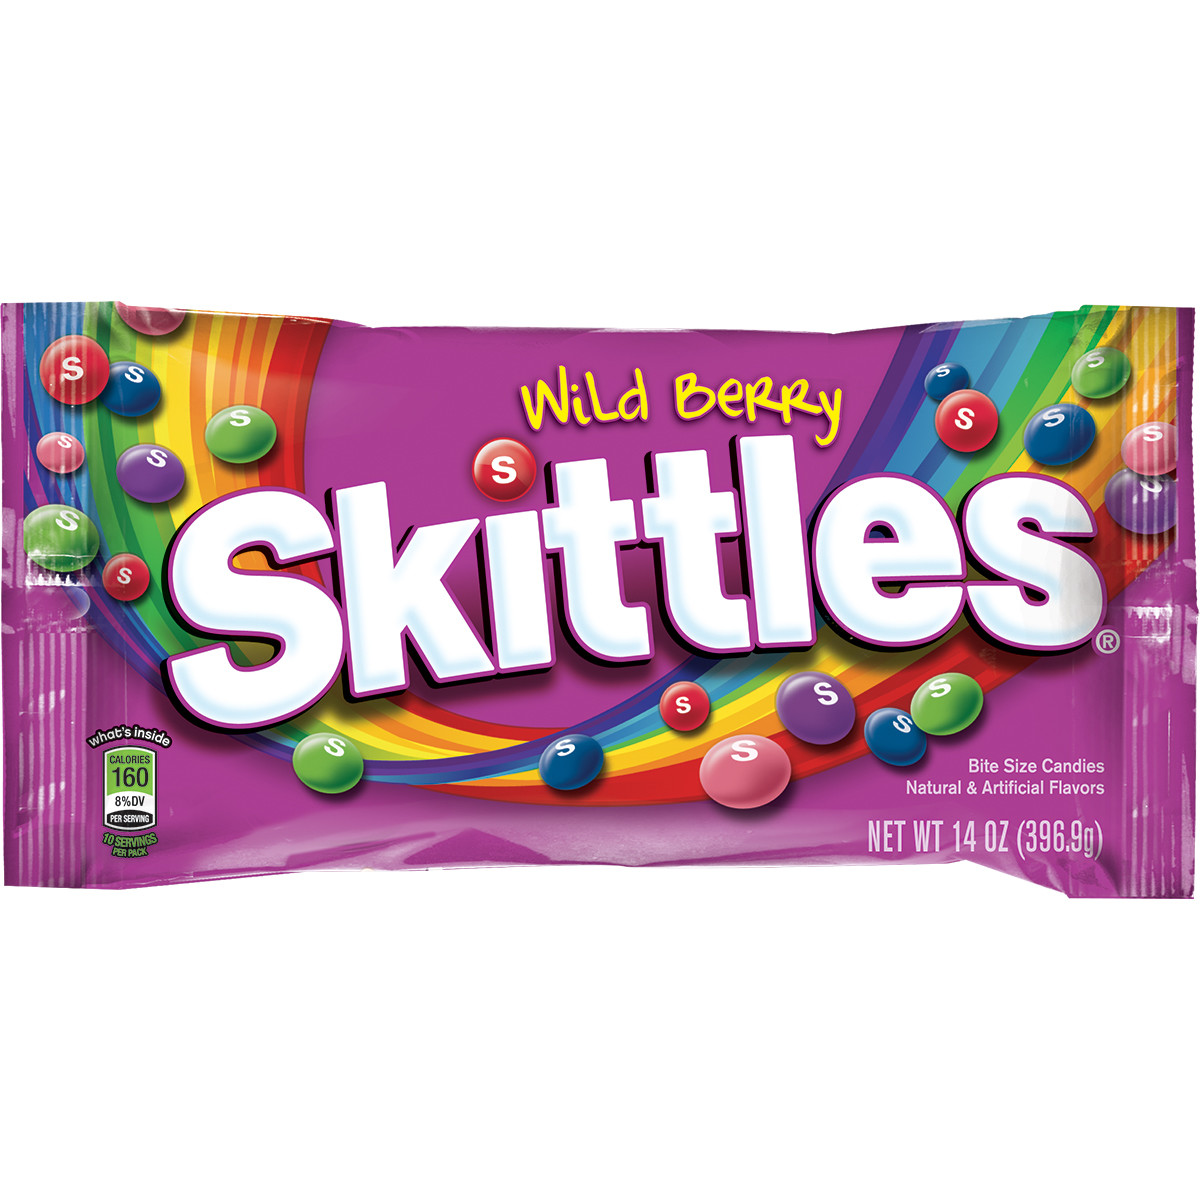 Skittles Candy Clipart